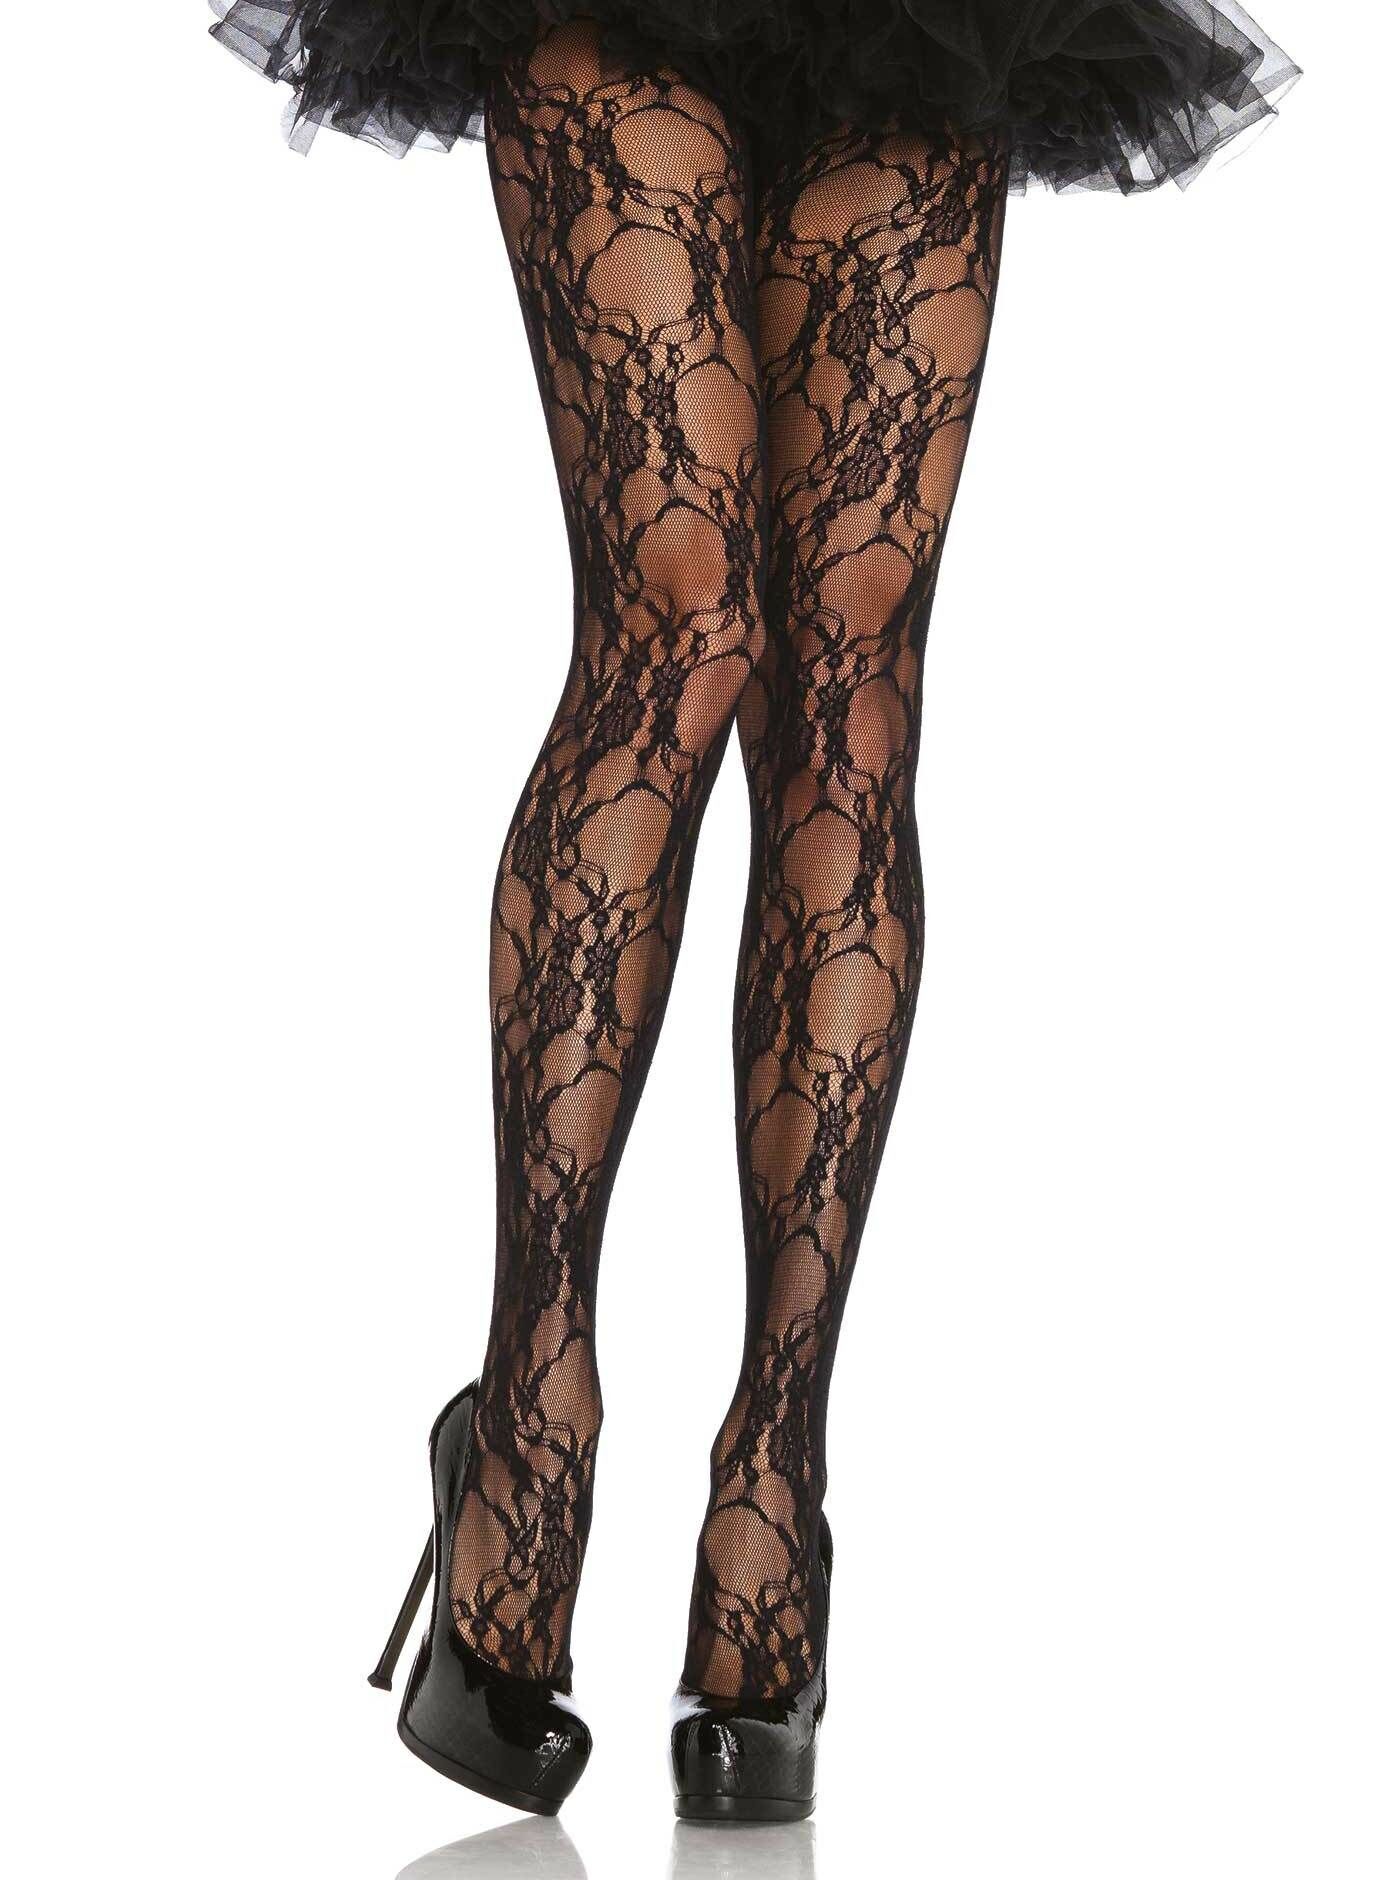 Black Floral Lace Fashion Tights